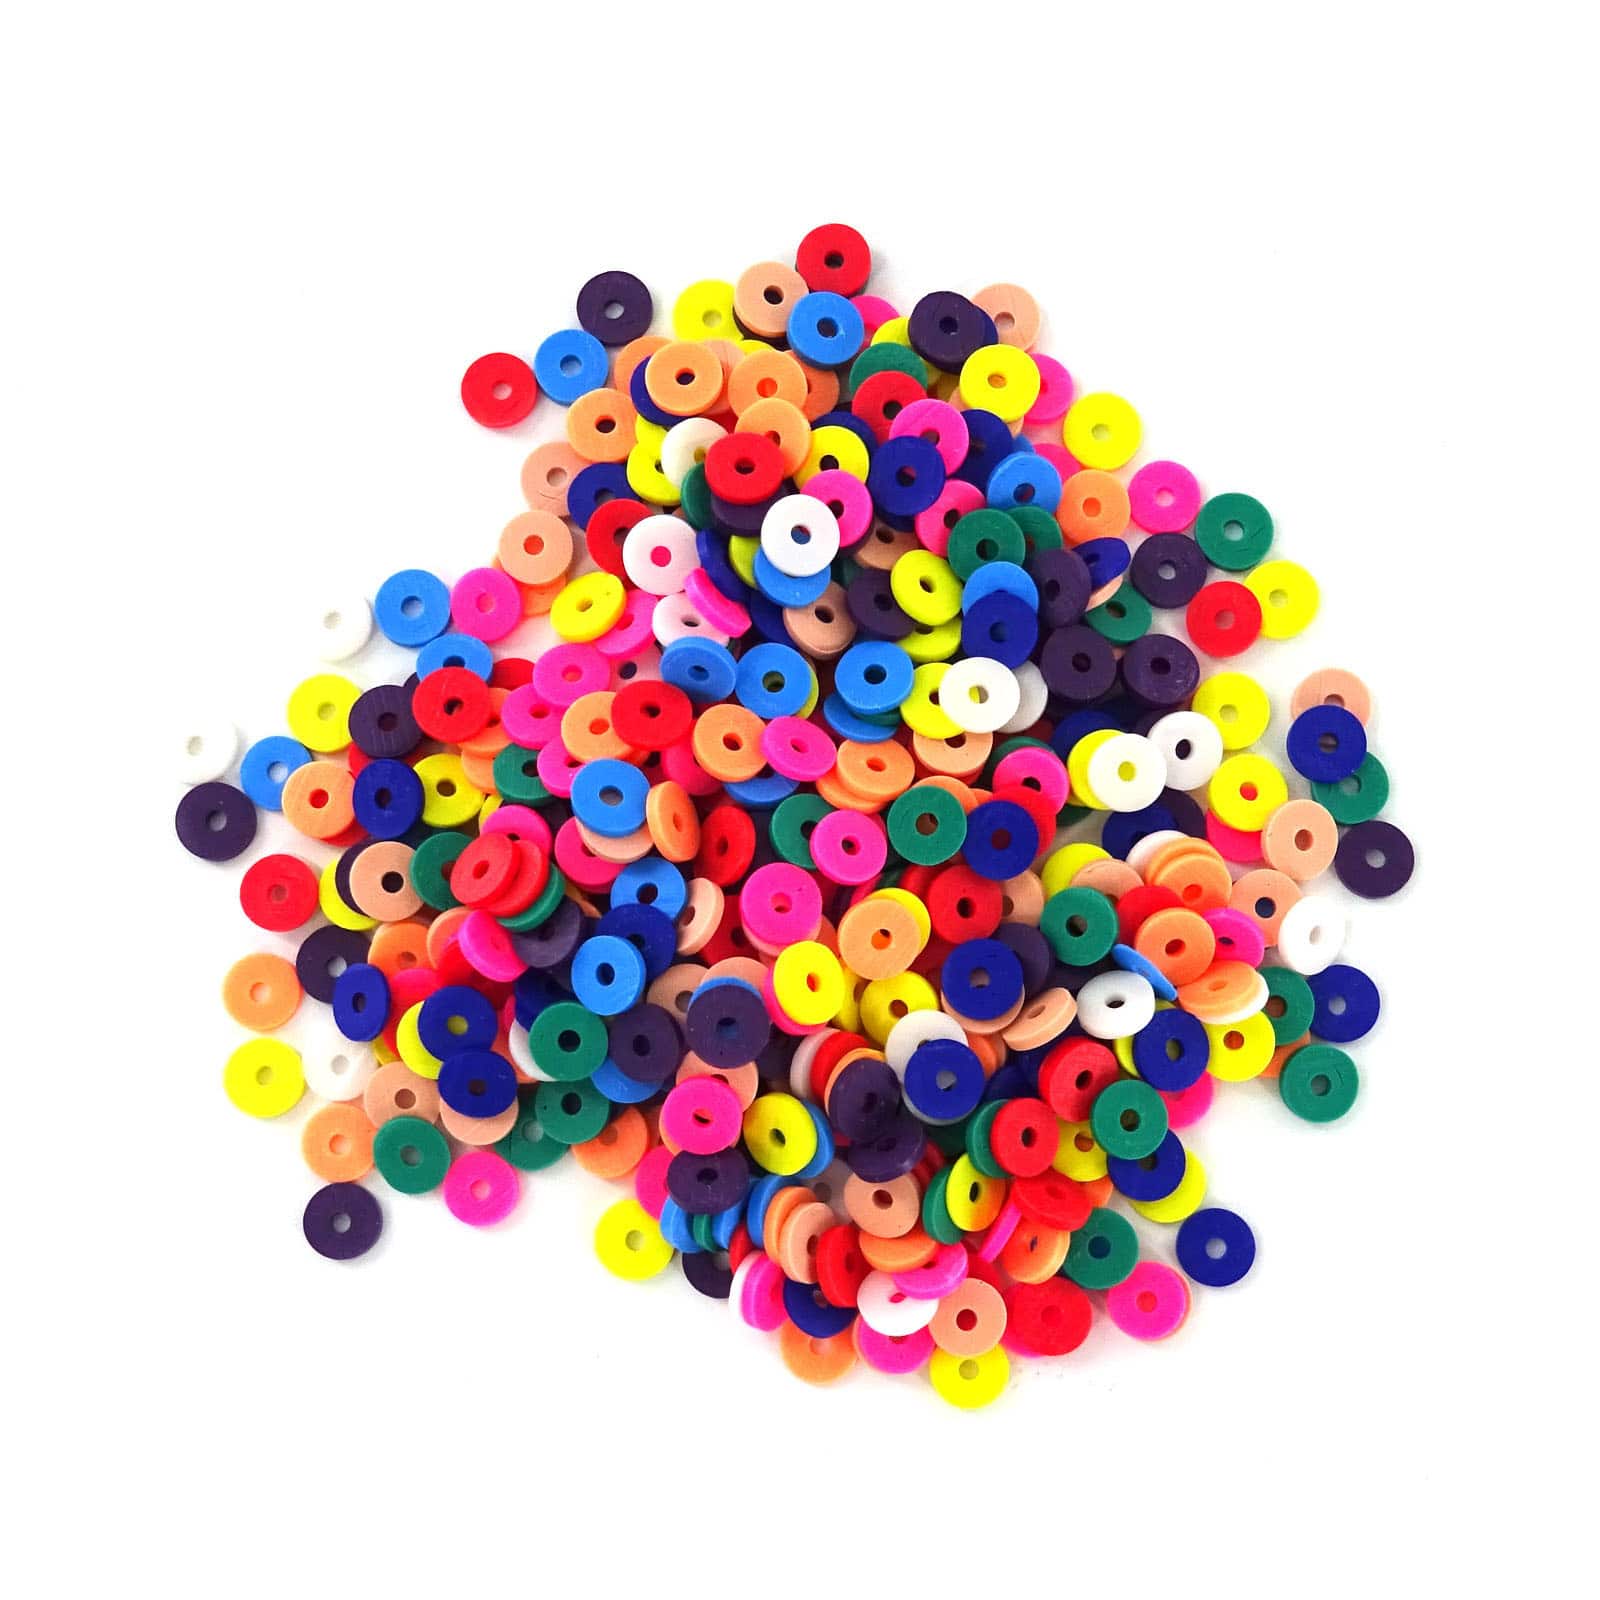 Creatology Multicolored Clay Beads - Each